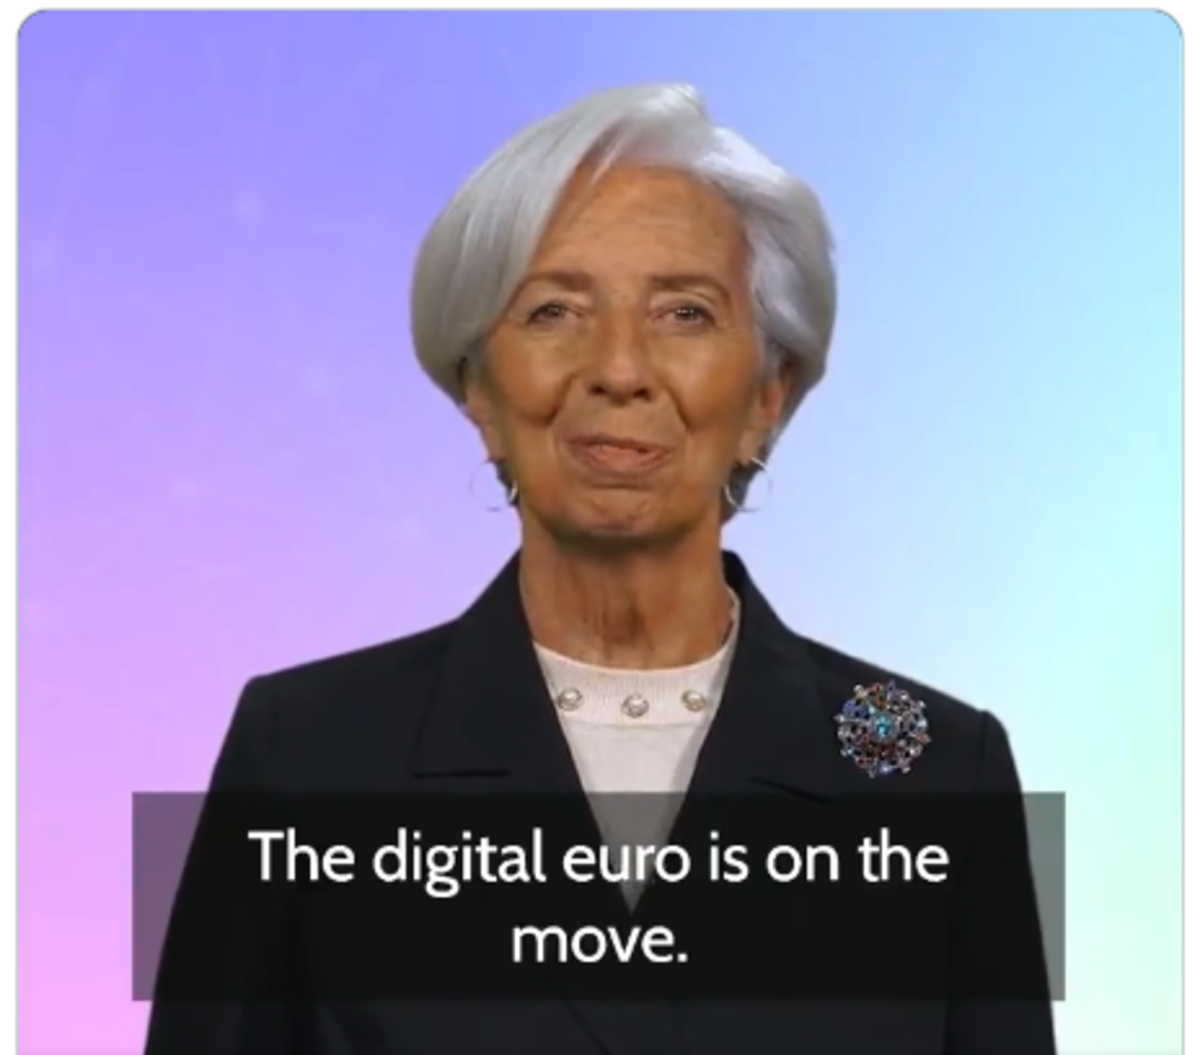 The Digital Euro new marketing campaign. Source: Christine Lagarde’s Twitter account